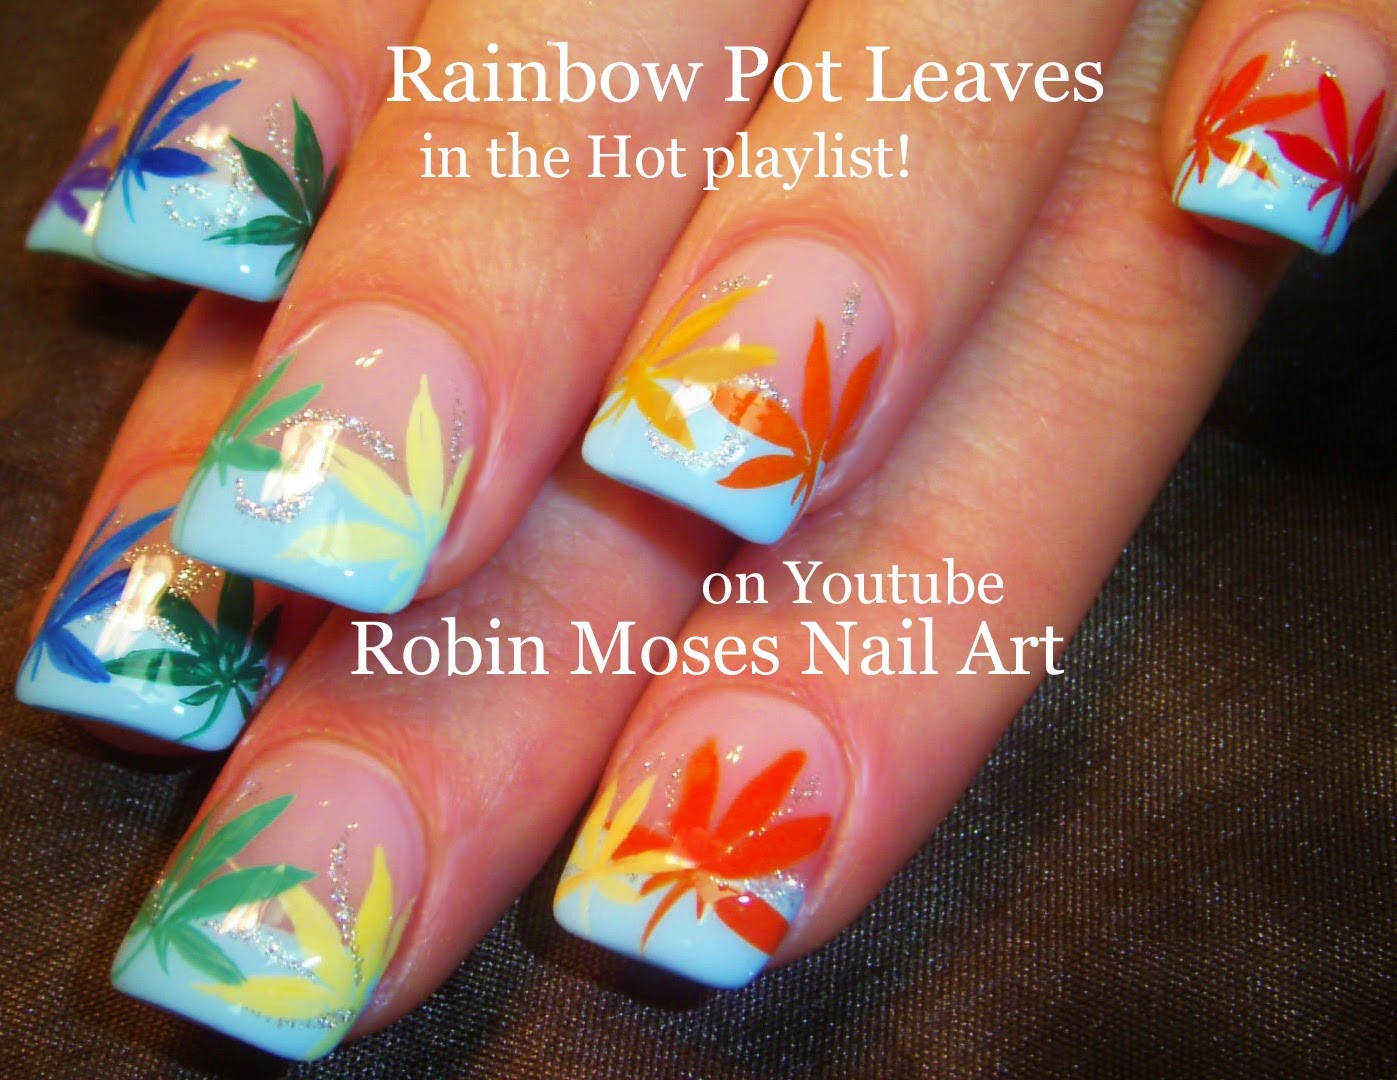 2. How to Create a Pot Leaf Nail Design - wide 6